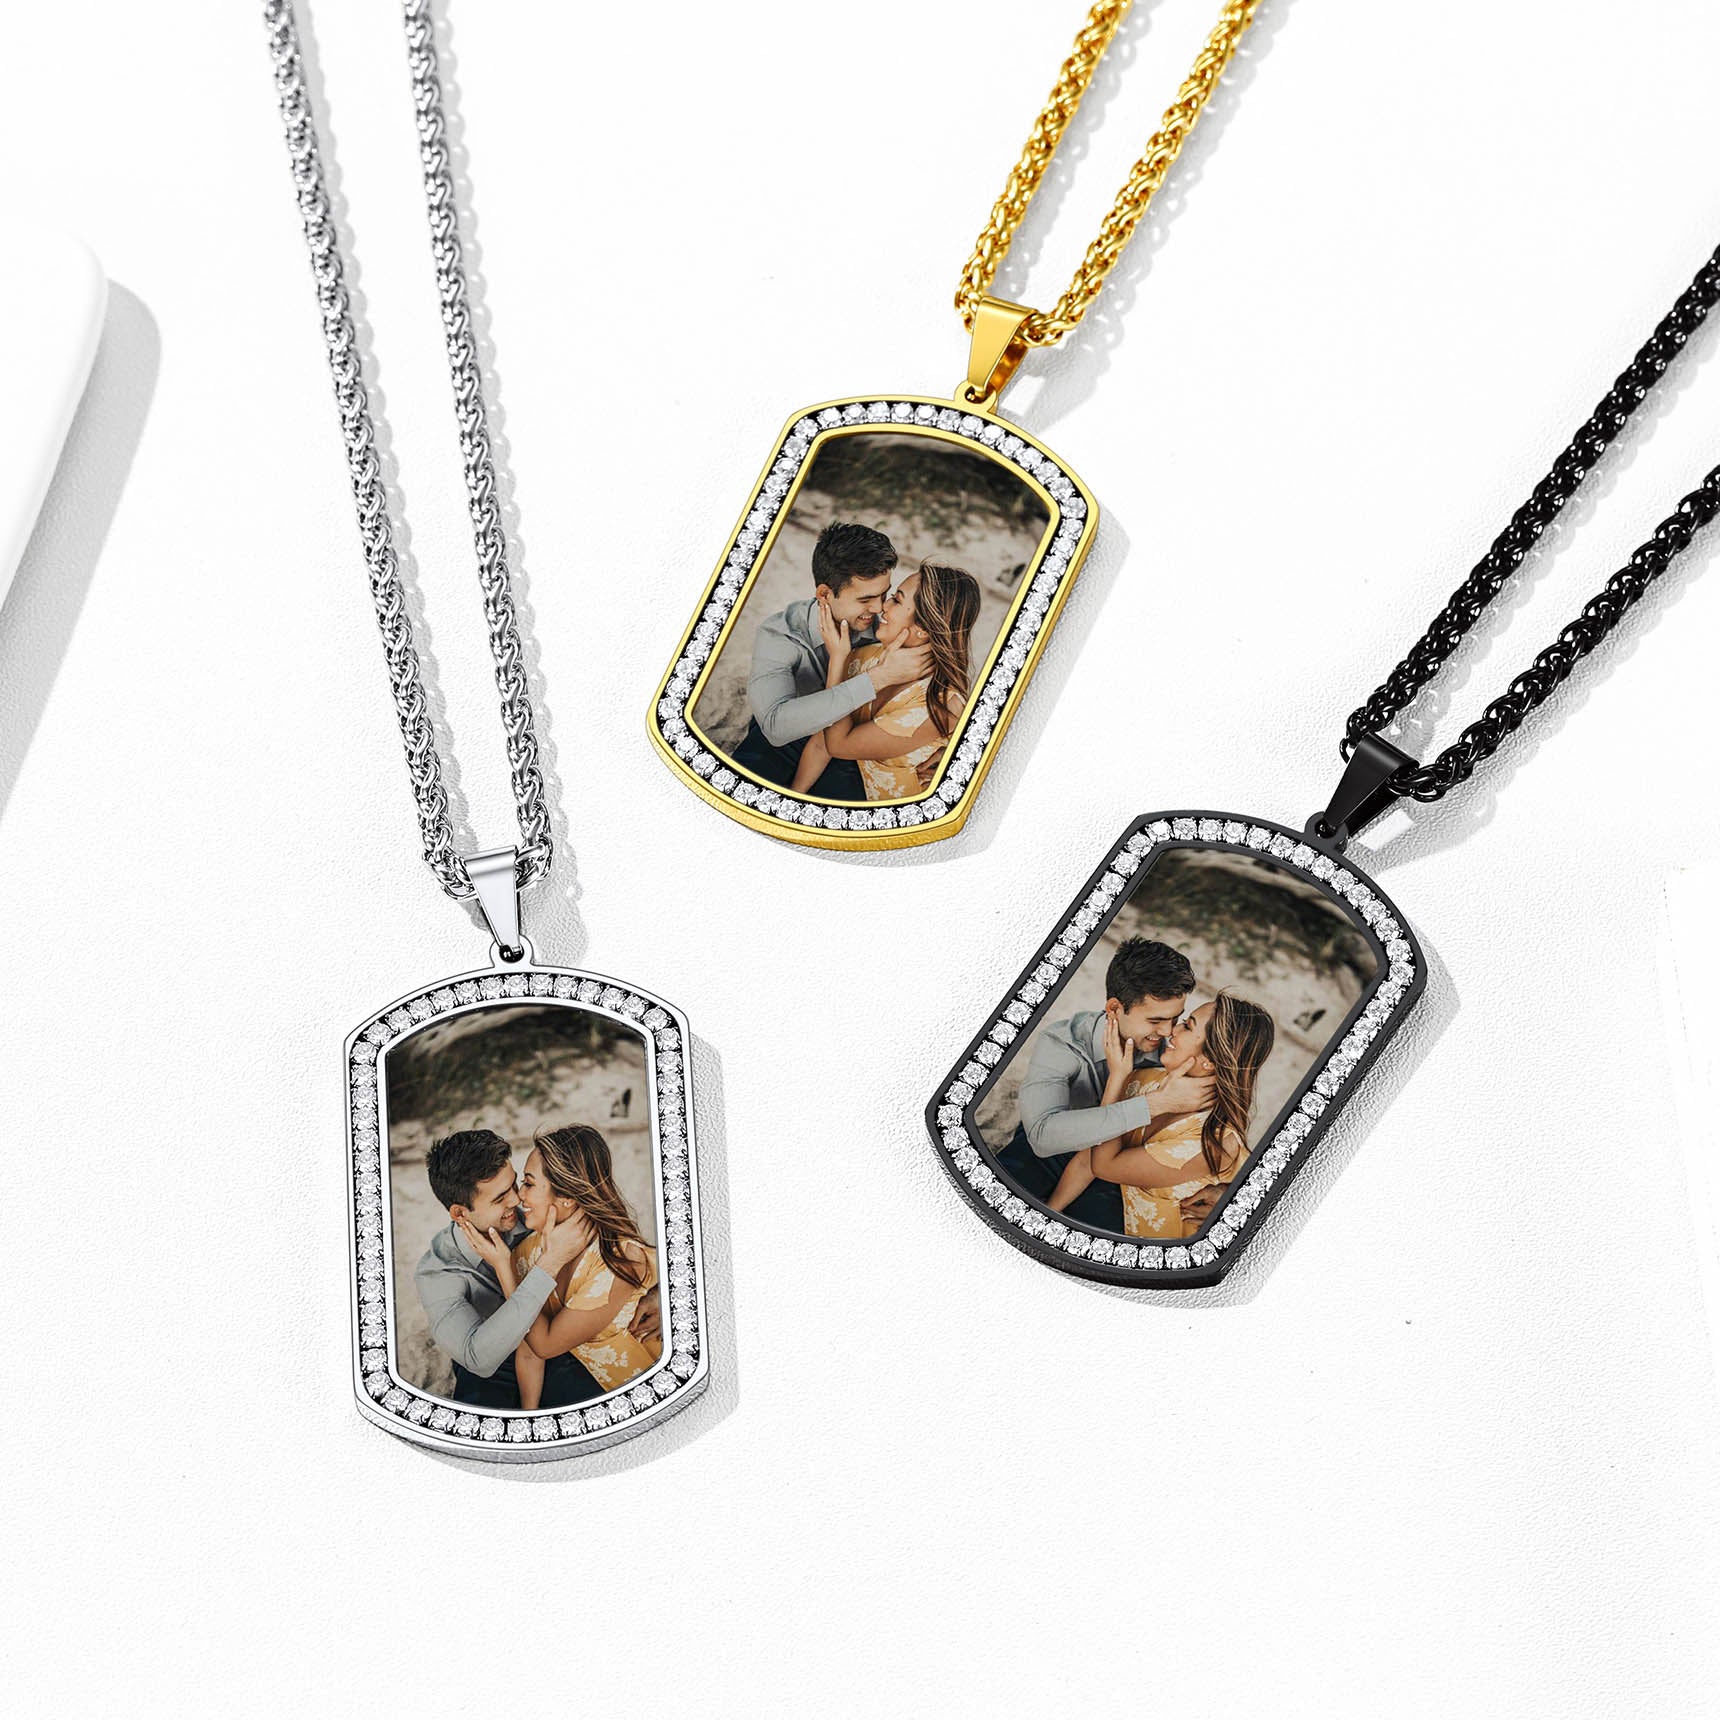 Customized Picture Engraved Dog Tag Necklace for Men/Women FaithHeart